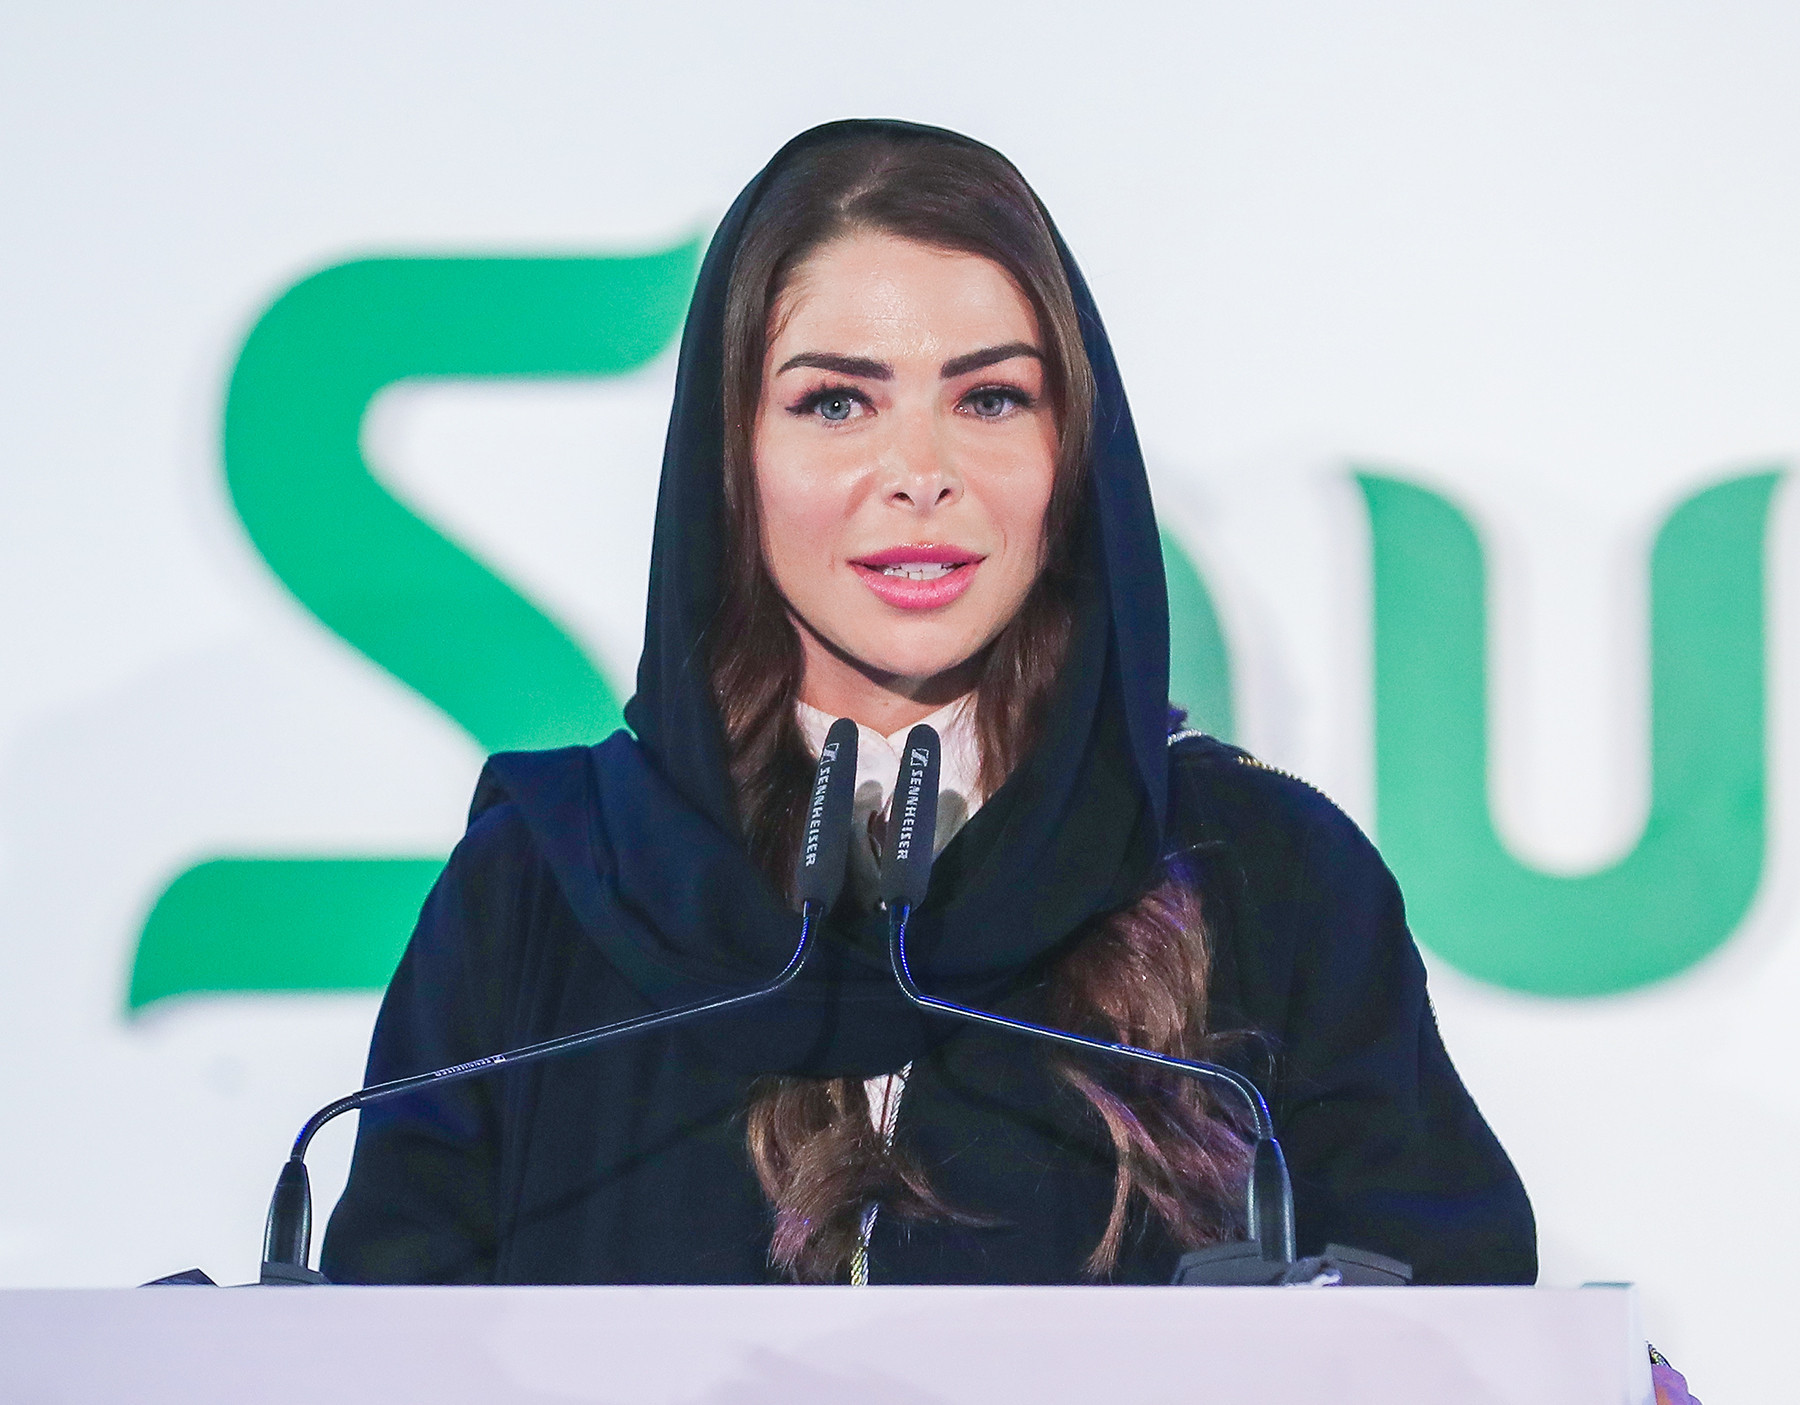 Riyadh 2030 puts Saudi Arabia's first female Olympic medallist in charge of Athletes' Commission